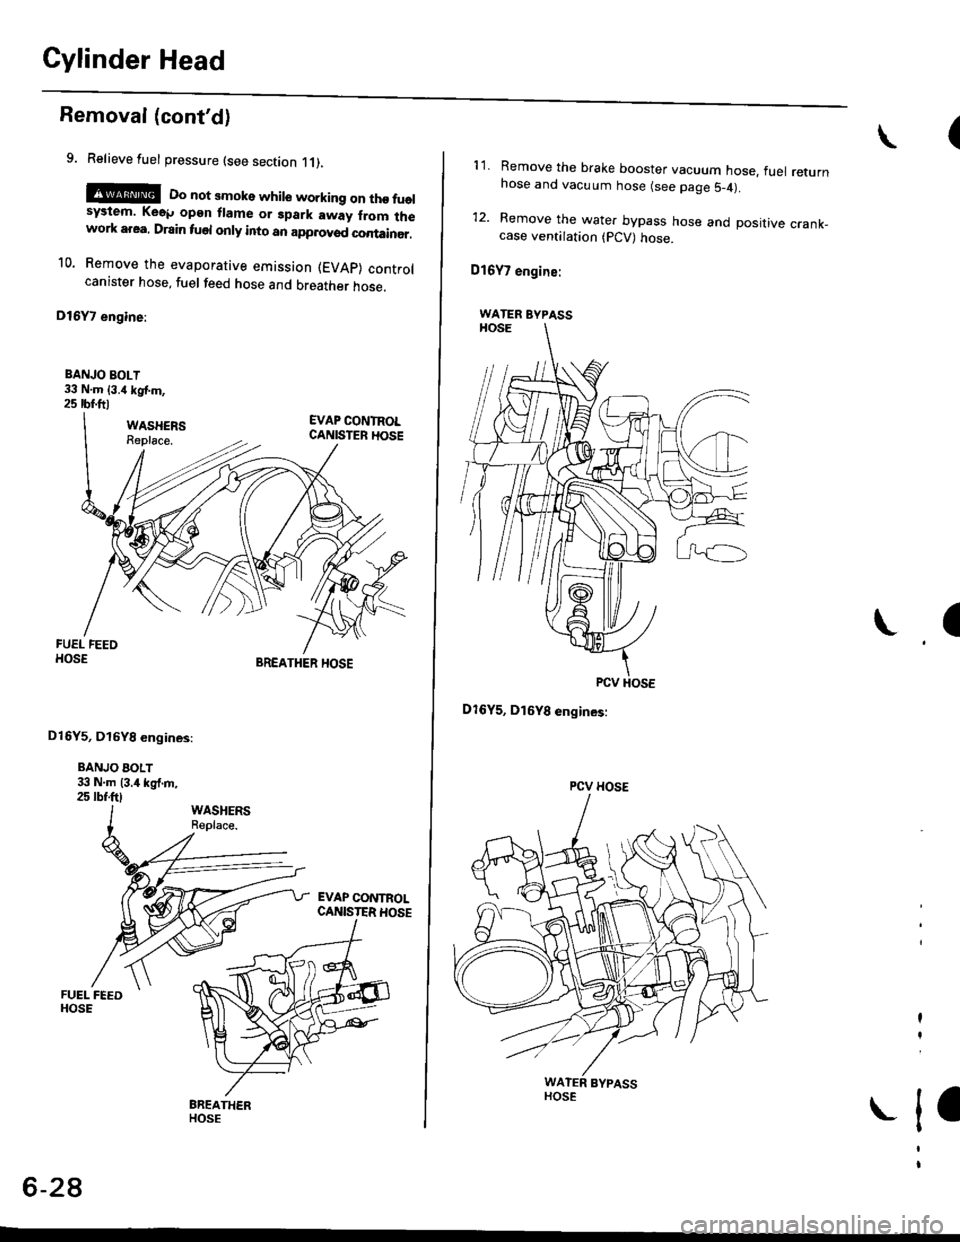 HONDA CIVIC 1997 6.G Workshop Manual Cylinder Head
Removal (contd)
9. Relieve fuel pressure (see section 11),
E@E Do not smoke while working on tho fuelsystem. Ke6p opgn flame or gpark away from lhework area, Drain fuel only into an app